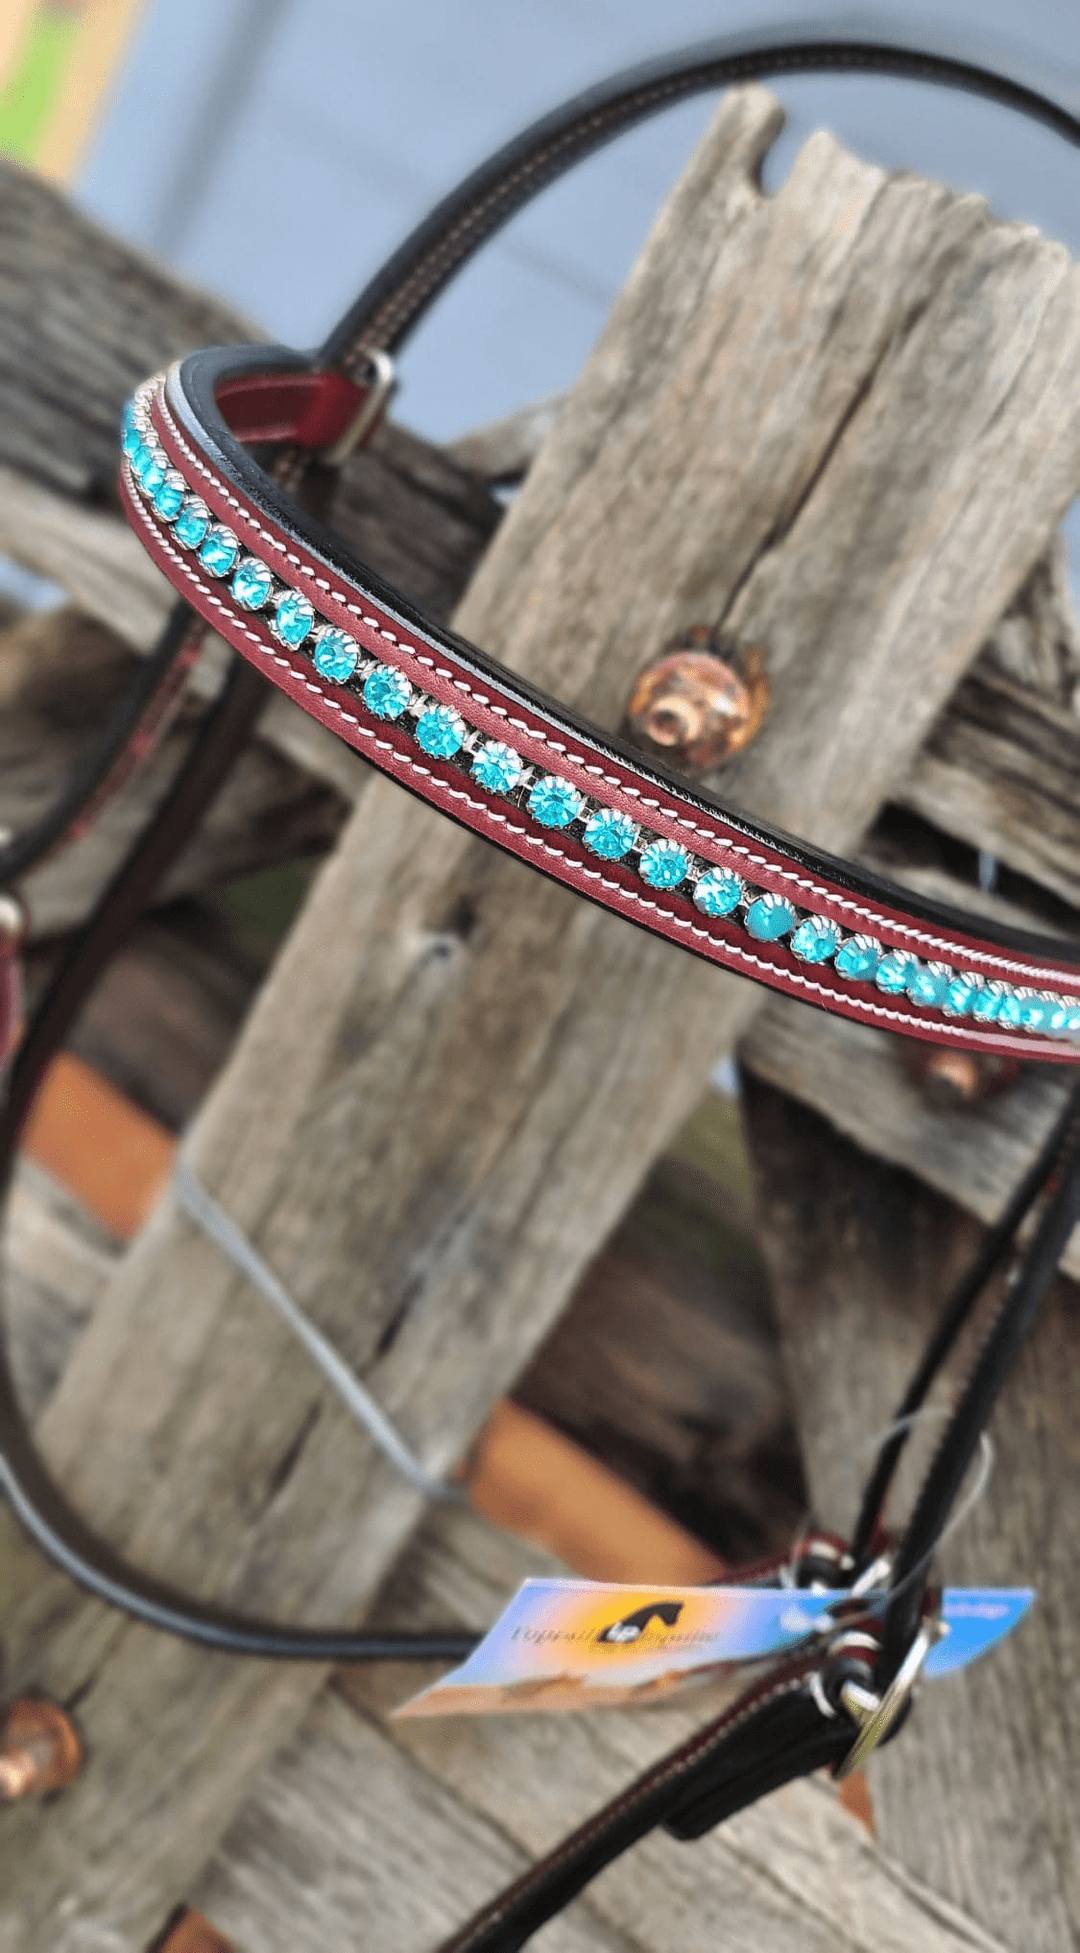 Top Rail Equine Bridles Cob-Full / Havana Brown Top Rail Leather Bridle with Turquoise Beading